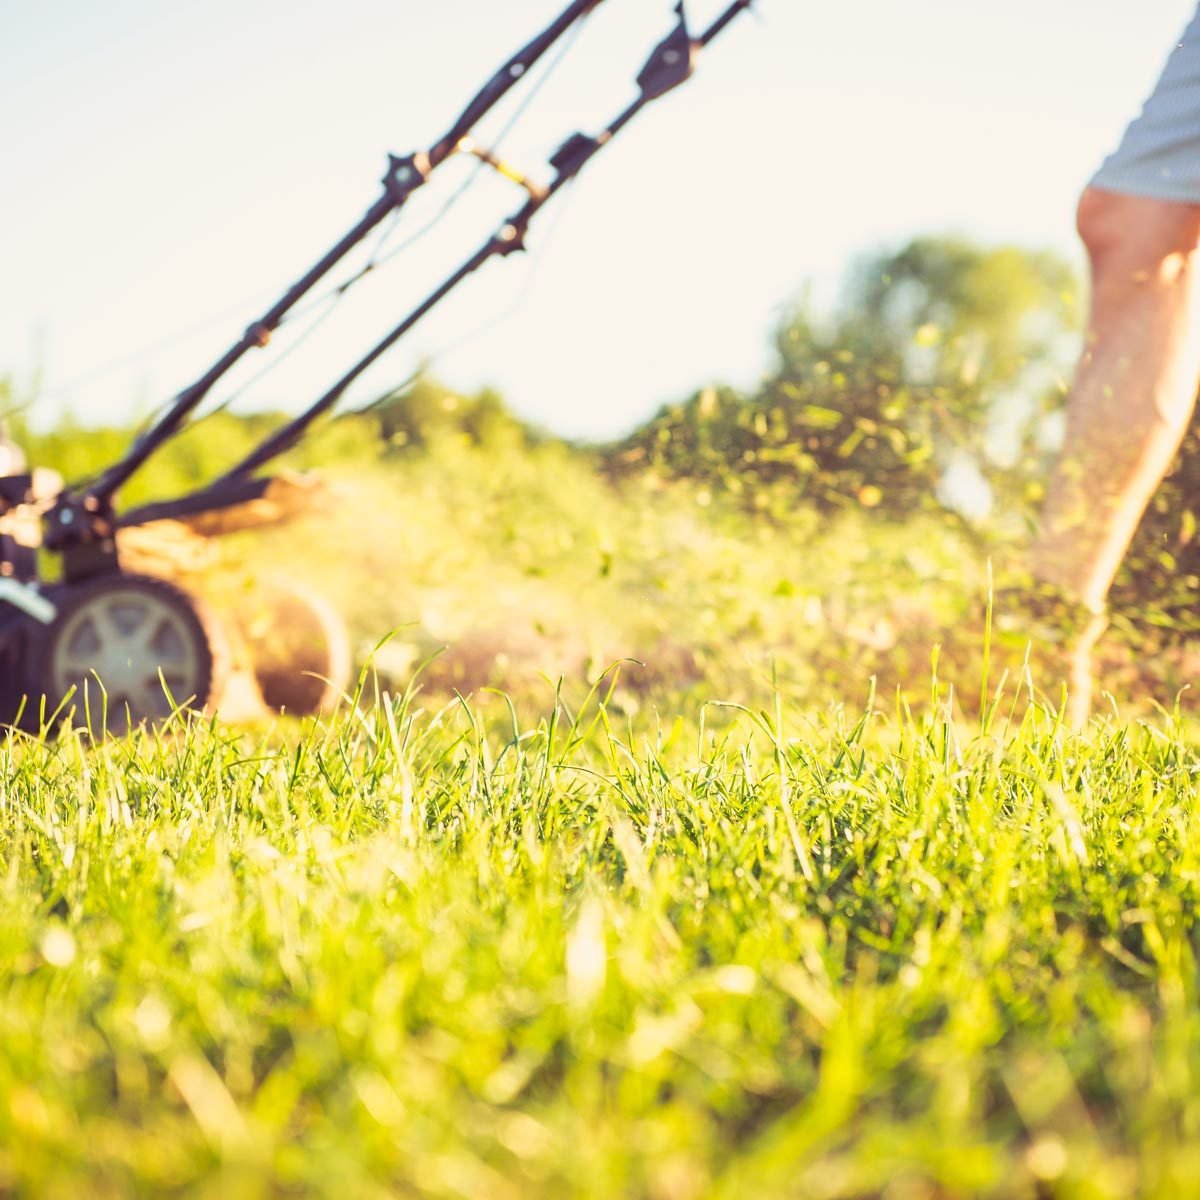  How to Keep Grass Green and Achieve a Healthy Lawn